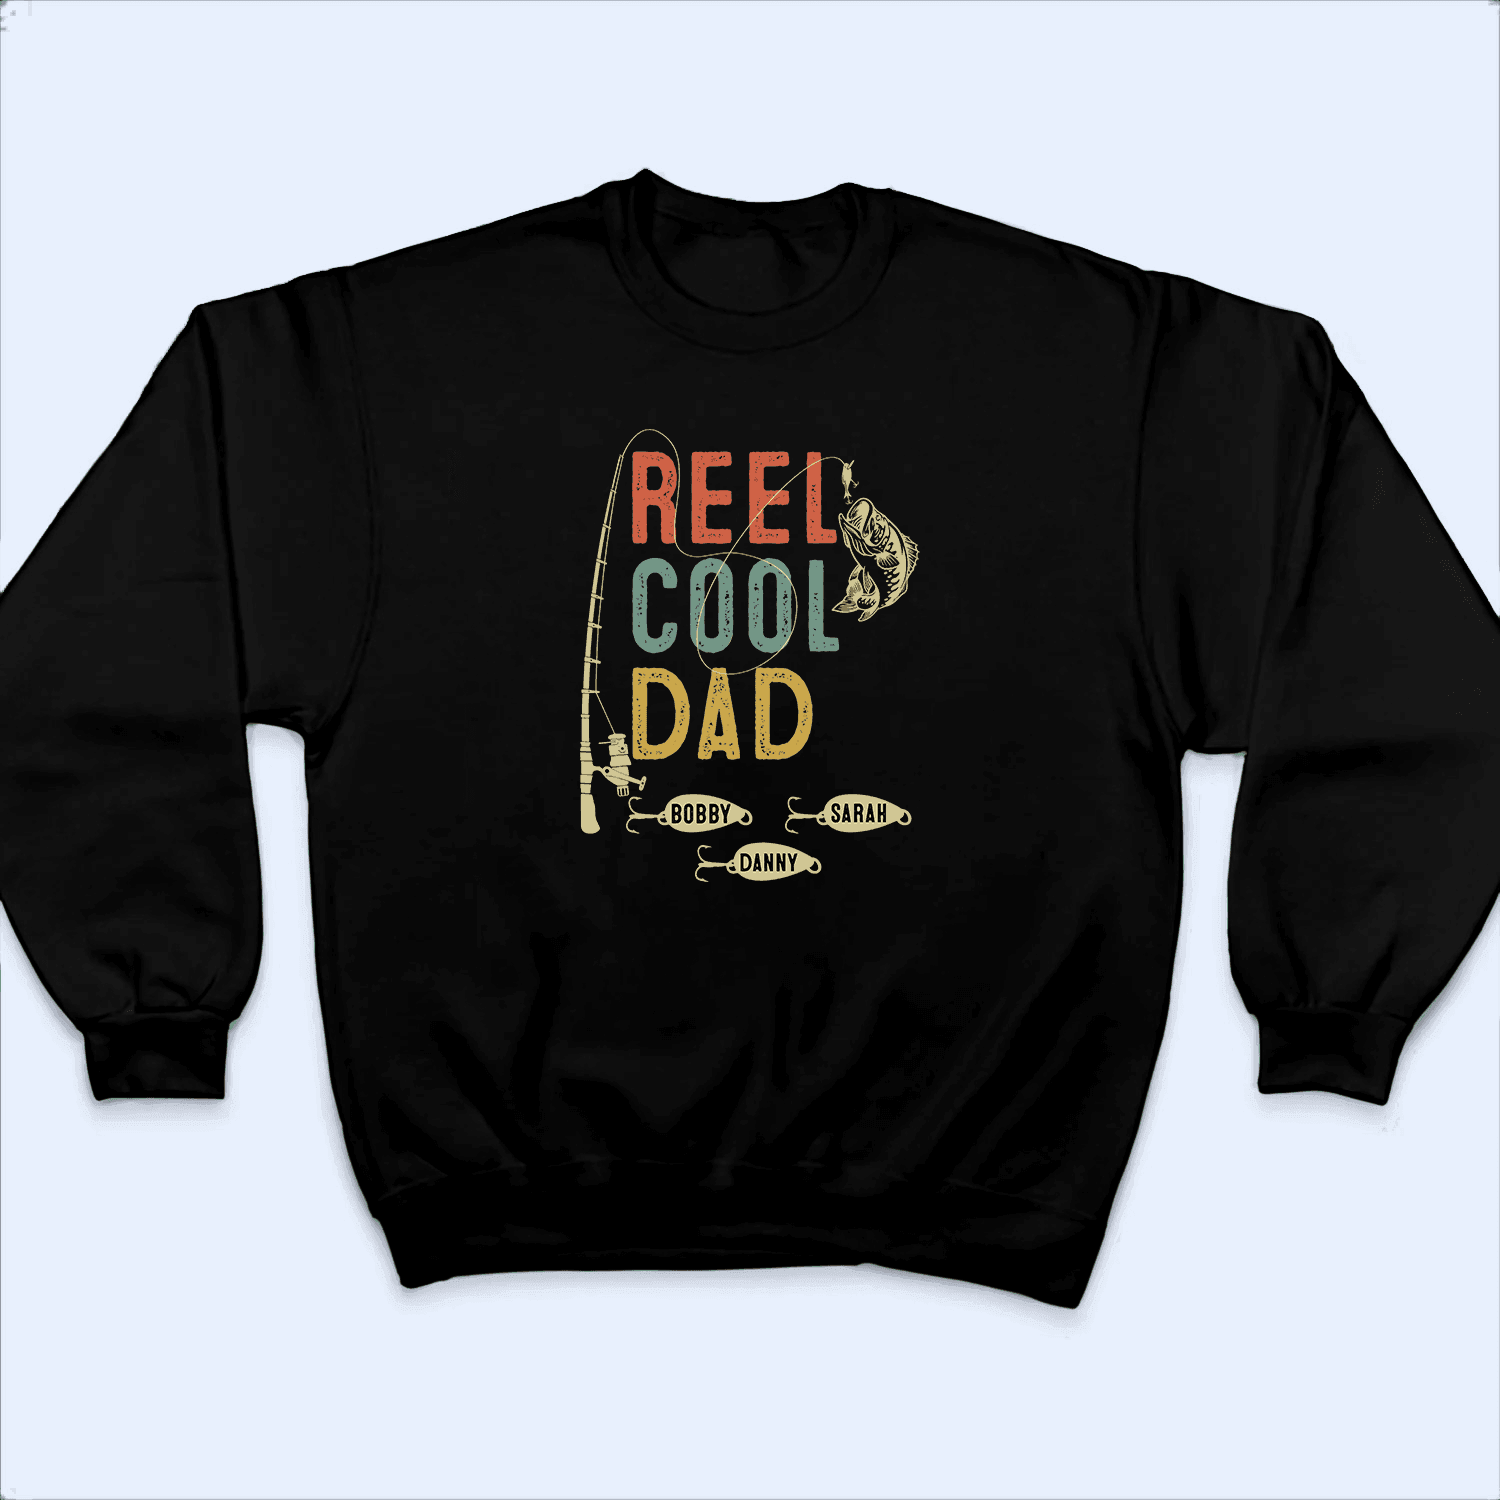 Reel Cool Dad - Fishing Dad - Funny Fathers Day - Personalized Custom T Shirt - Birthday, Loving, Funny Gift for Grandfather/Dad/Father, Husband, Grandparent - Suzitee Store